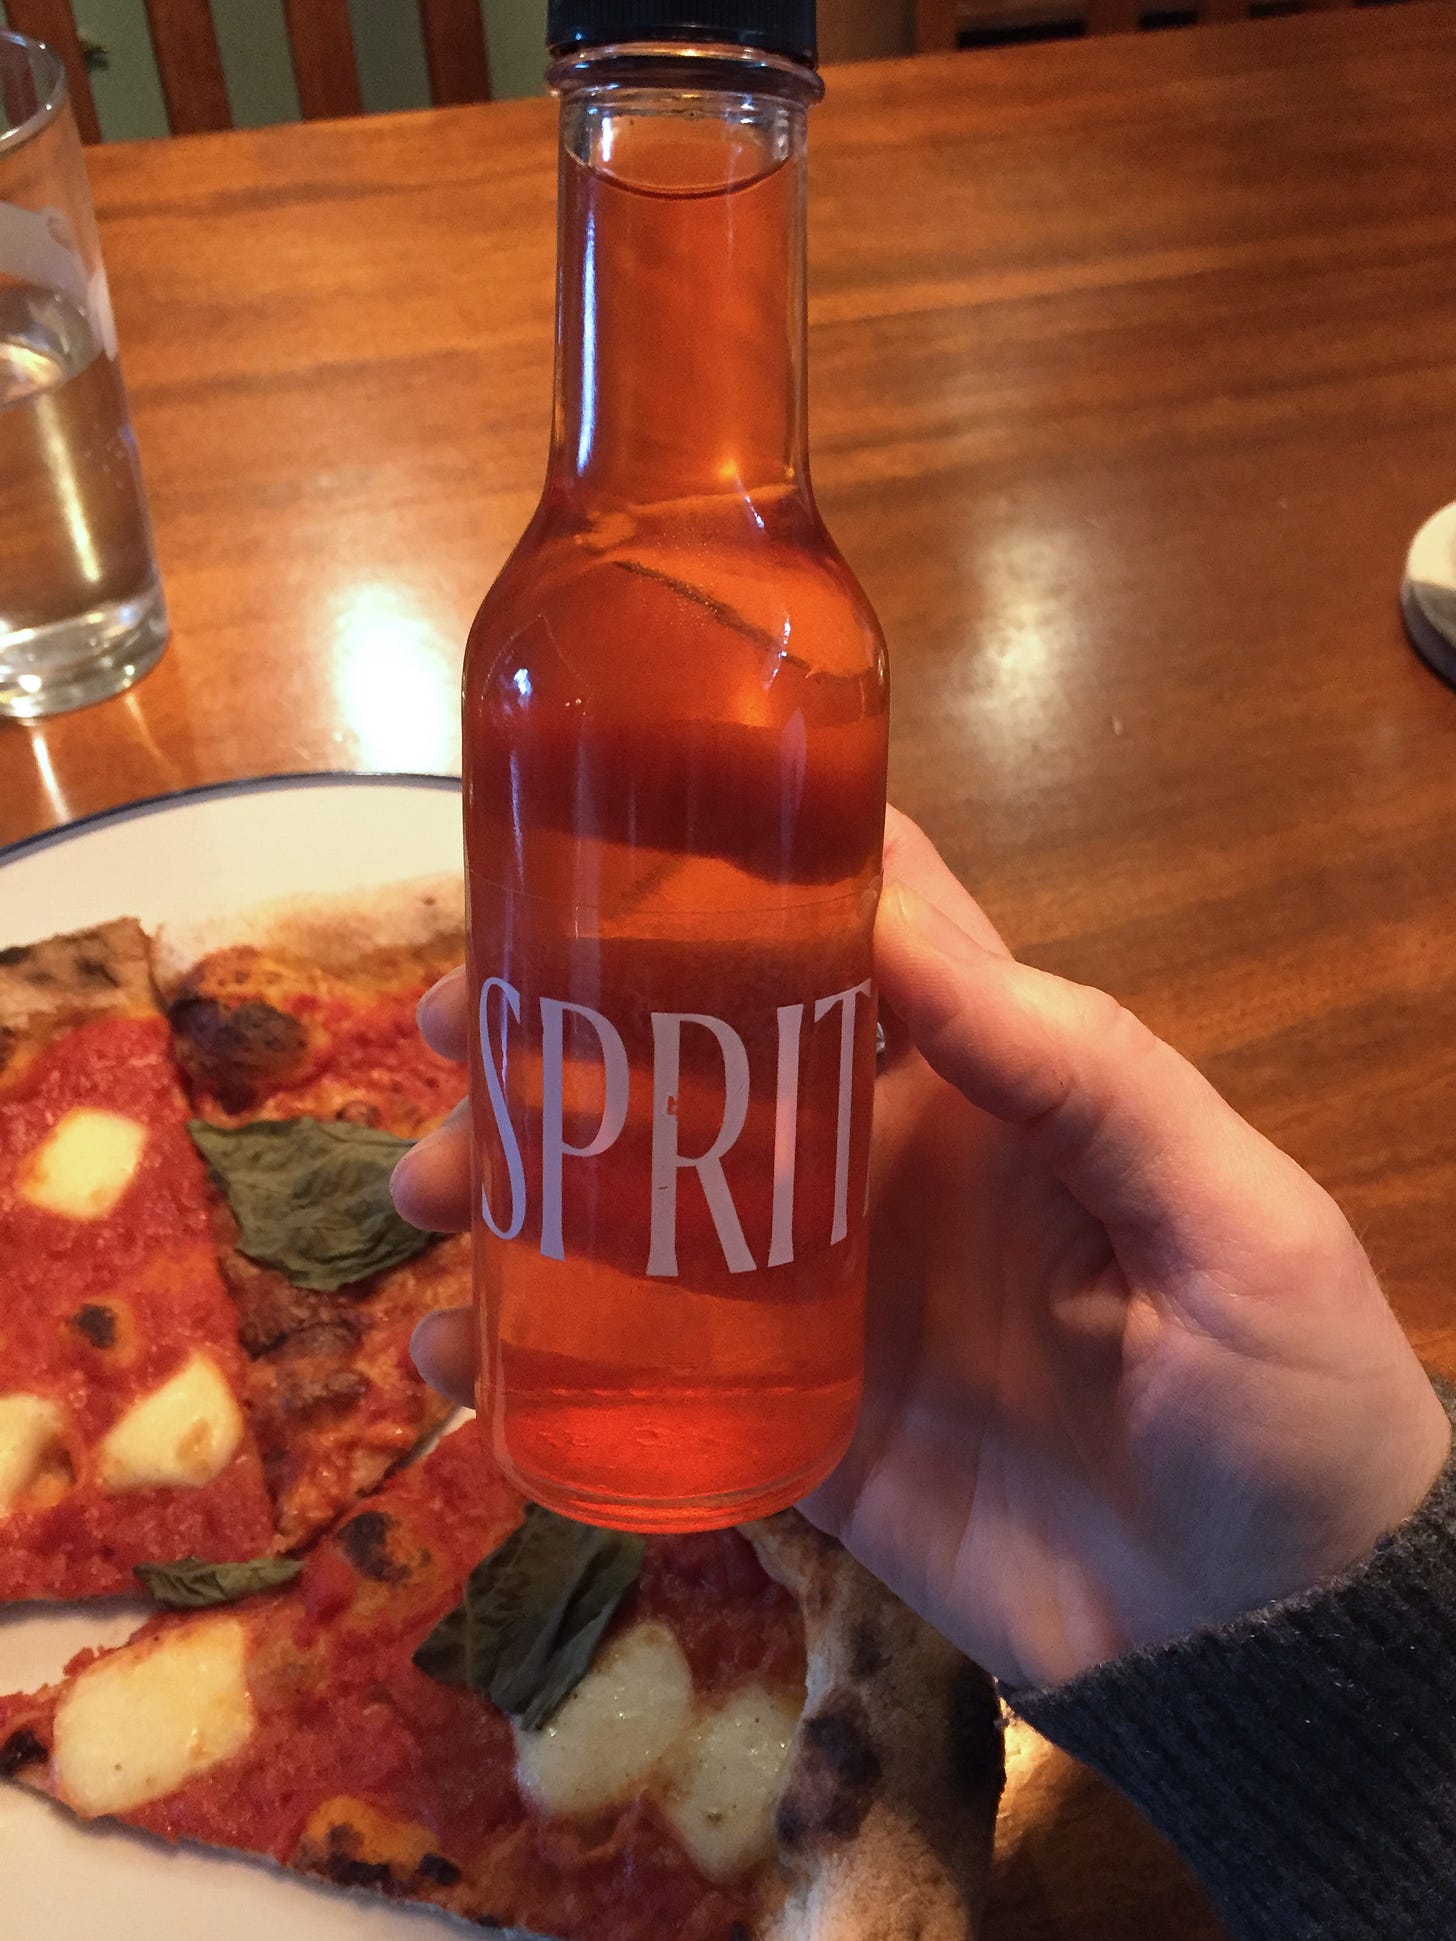 a tiny bottle of reddish Aperol spritz being held in front of a plate of margherita pizza